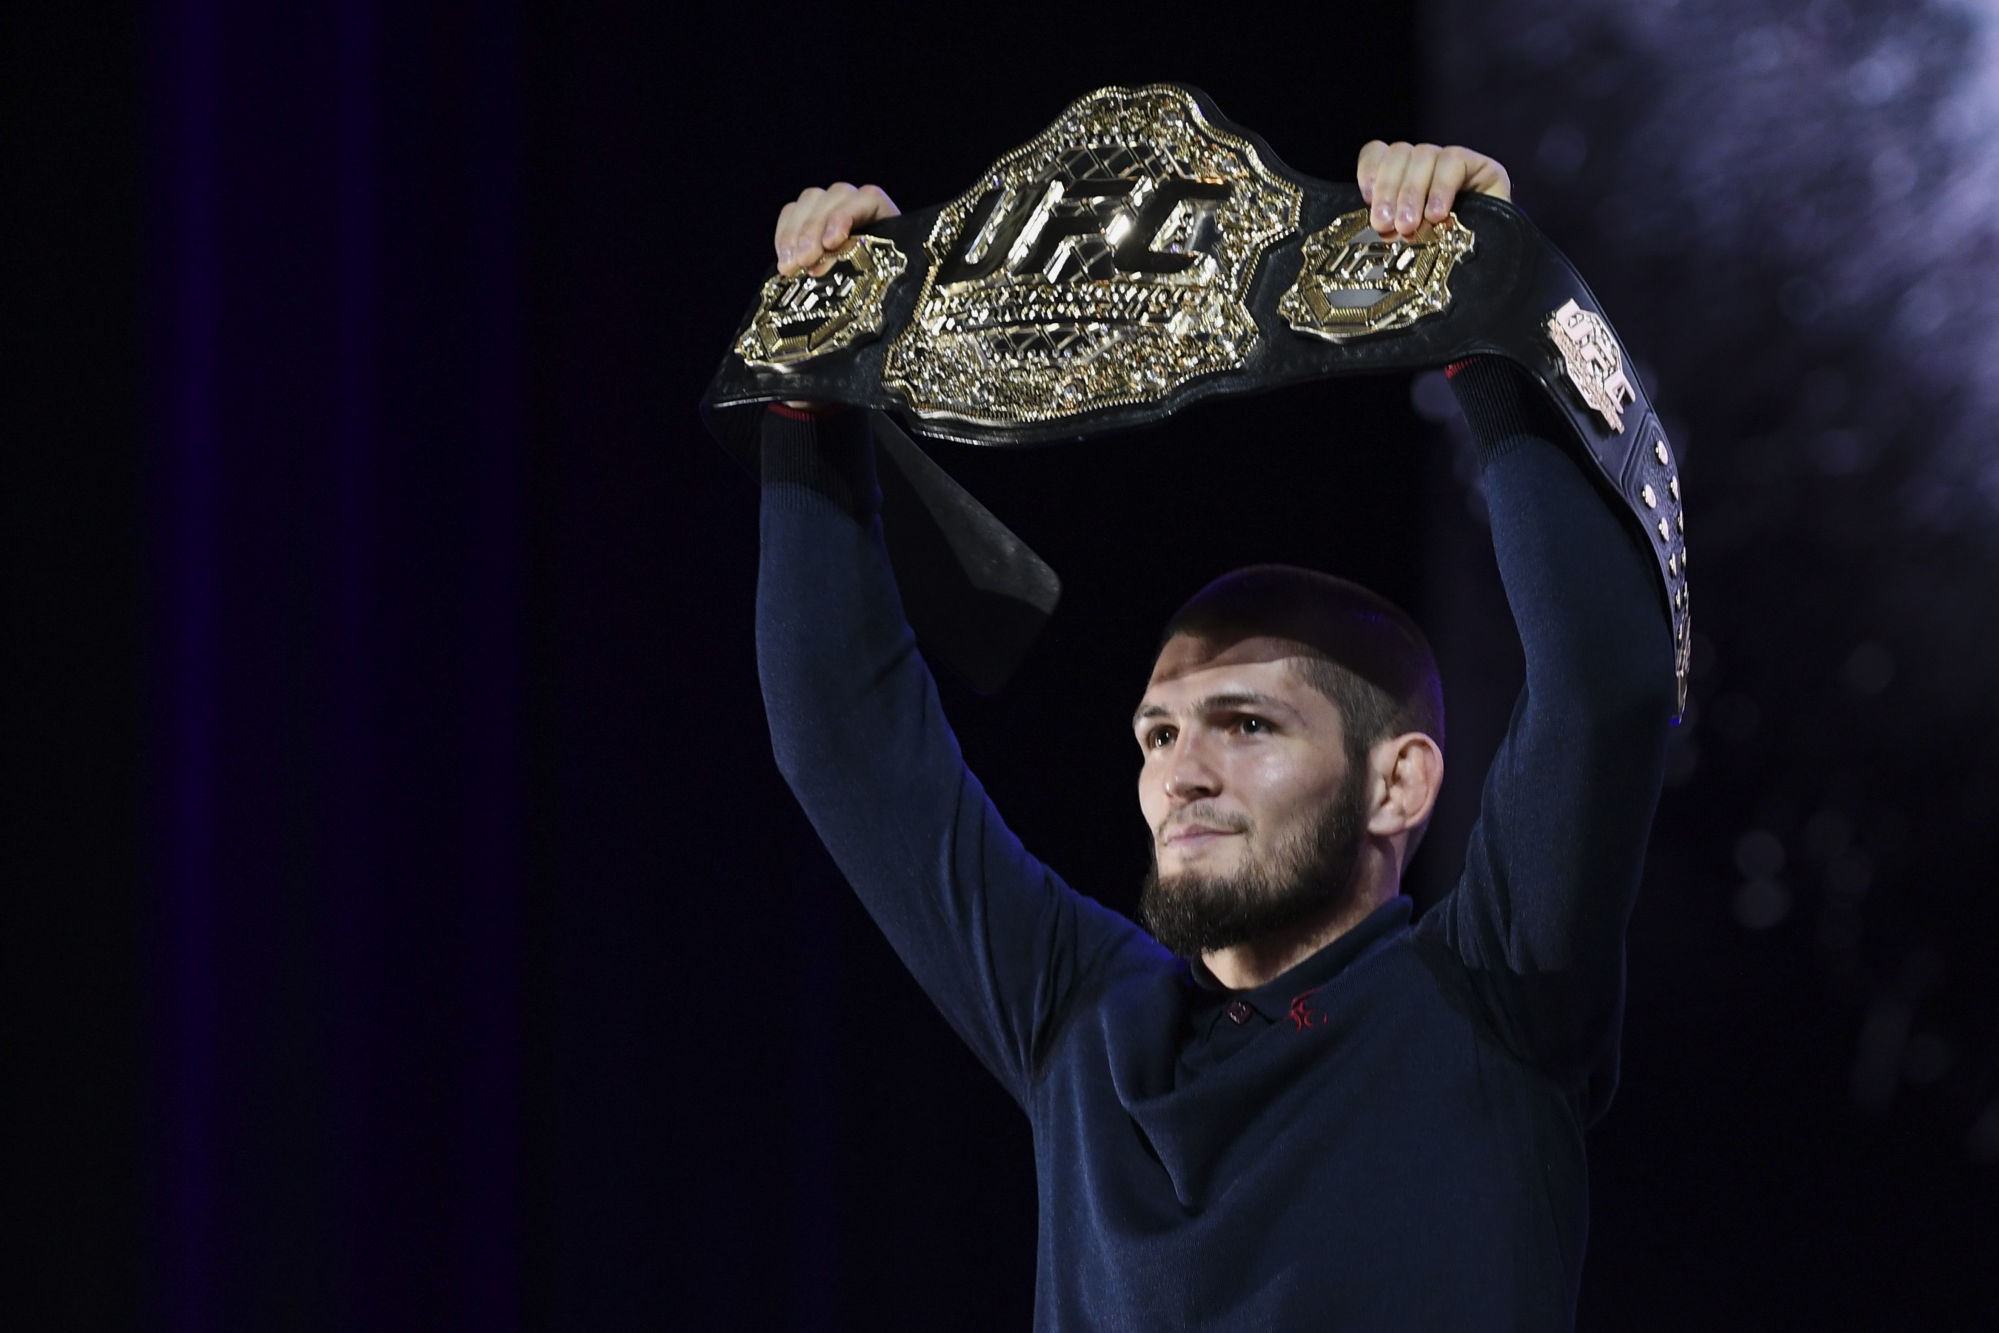 4 October 2018; Khabib Nurmagomedov following a press conference for UFC 229 at the Park Theater in Las Vegas, Nevada, United States. Photo by Stephen McCarthy/Sportsfile / Icon Sport